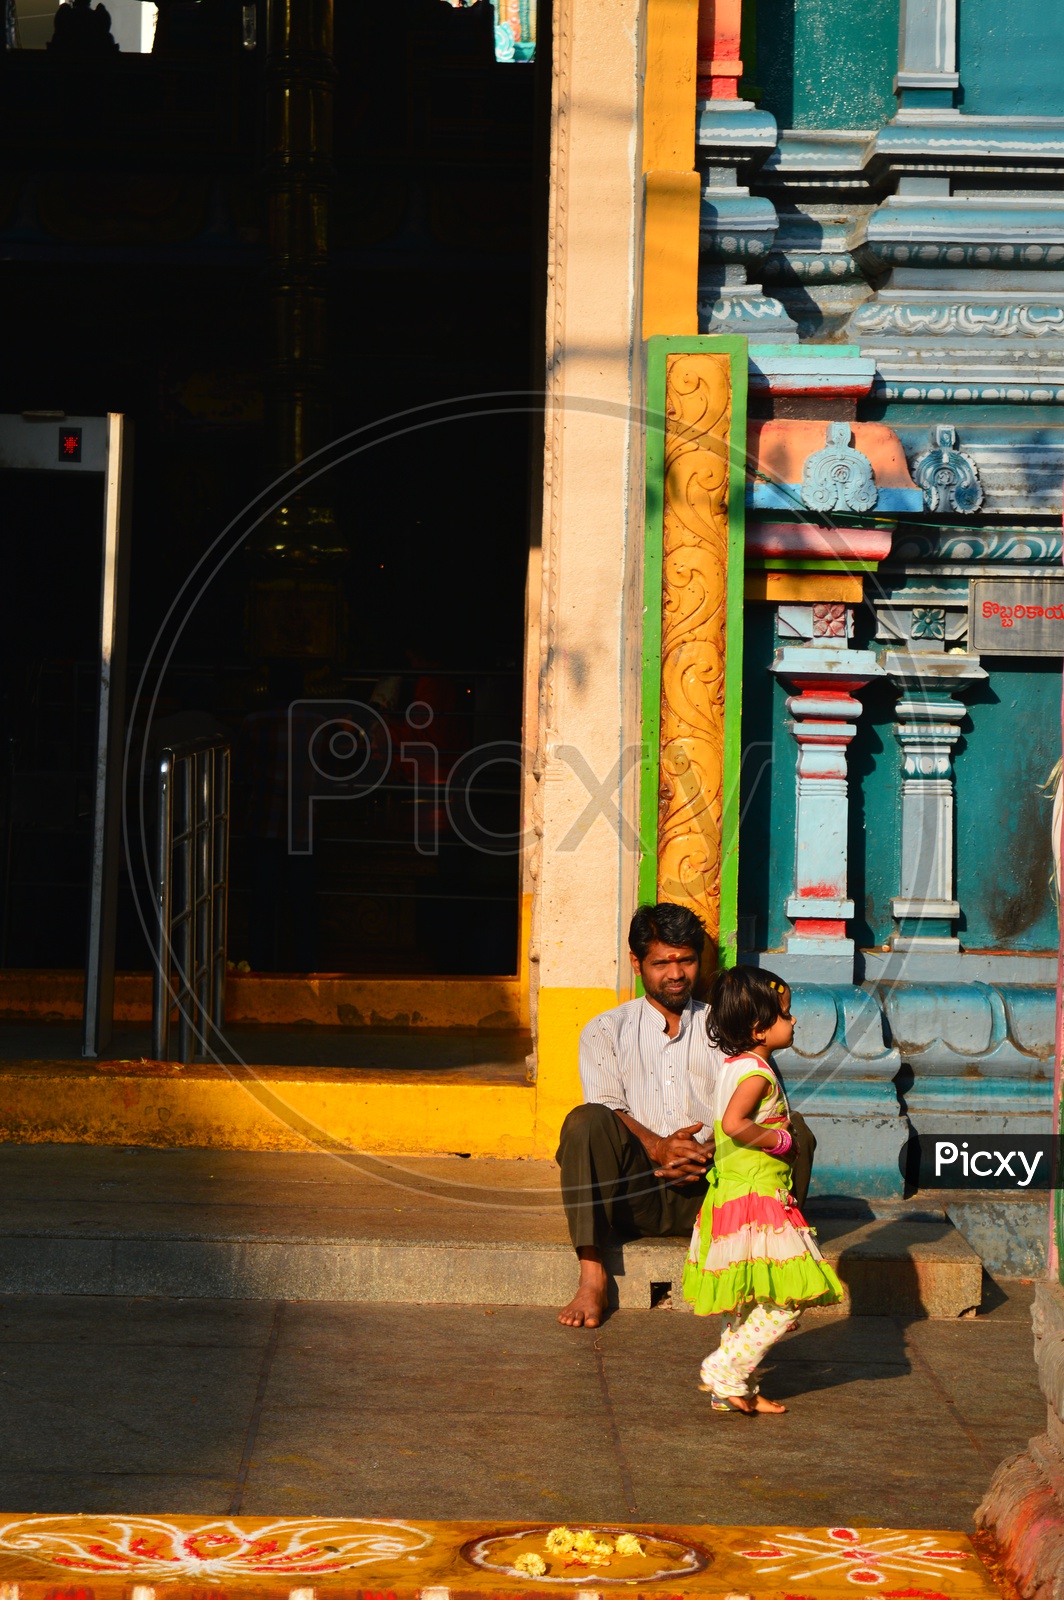 A Man With His Daughter Sitting In a temple